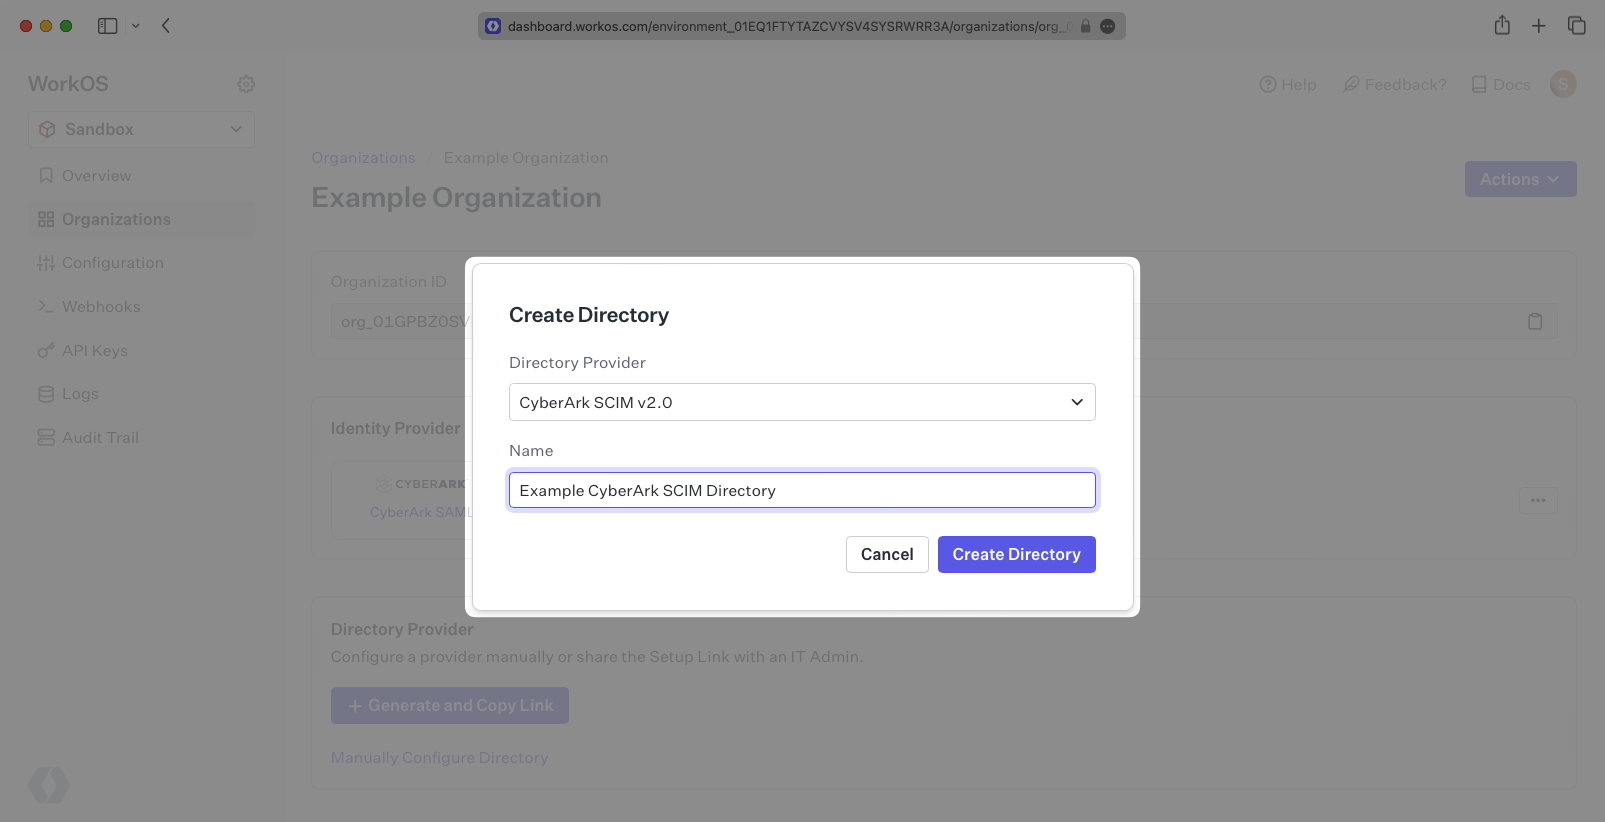 A screenshot showing the proper configuration of the "Create Directory" modal in the WorkOS dashboard.